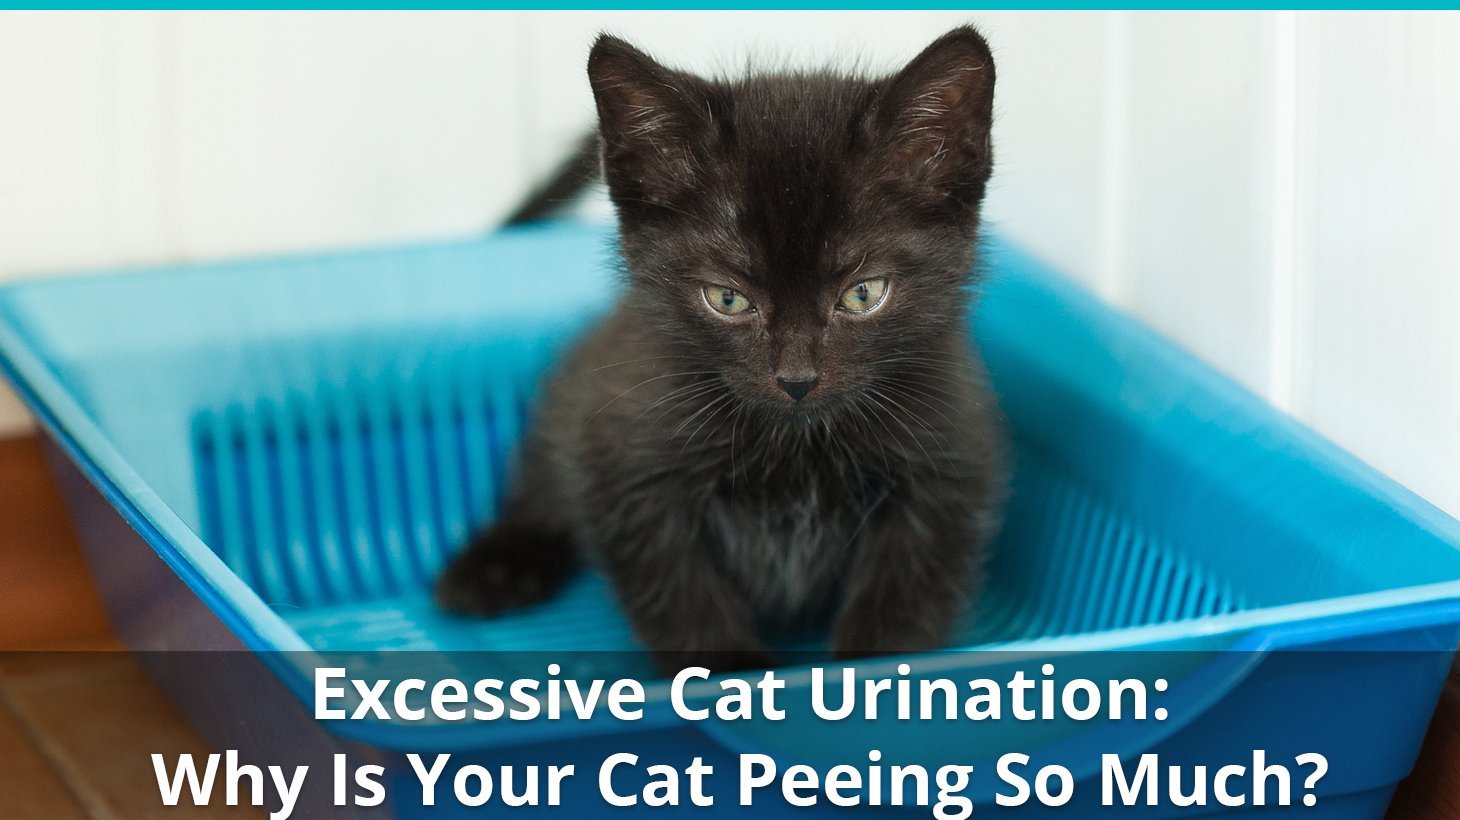 How To Get Your Cat To Pee Why Is My Cat Peeing Excessively? How Often Do They Pee? Help!